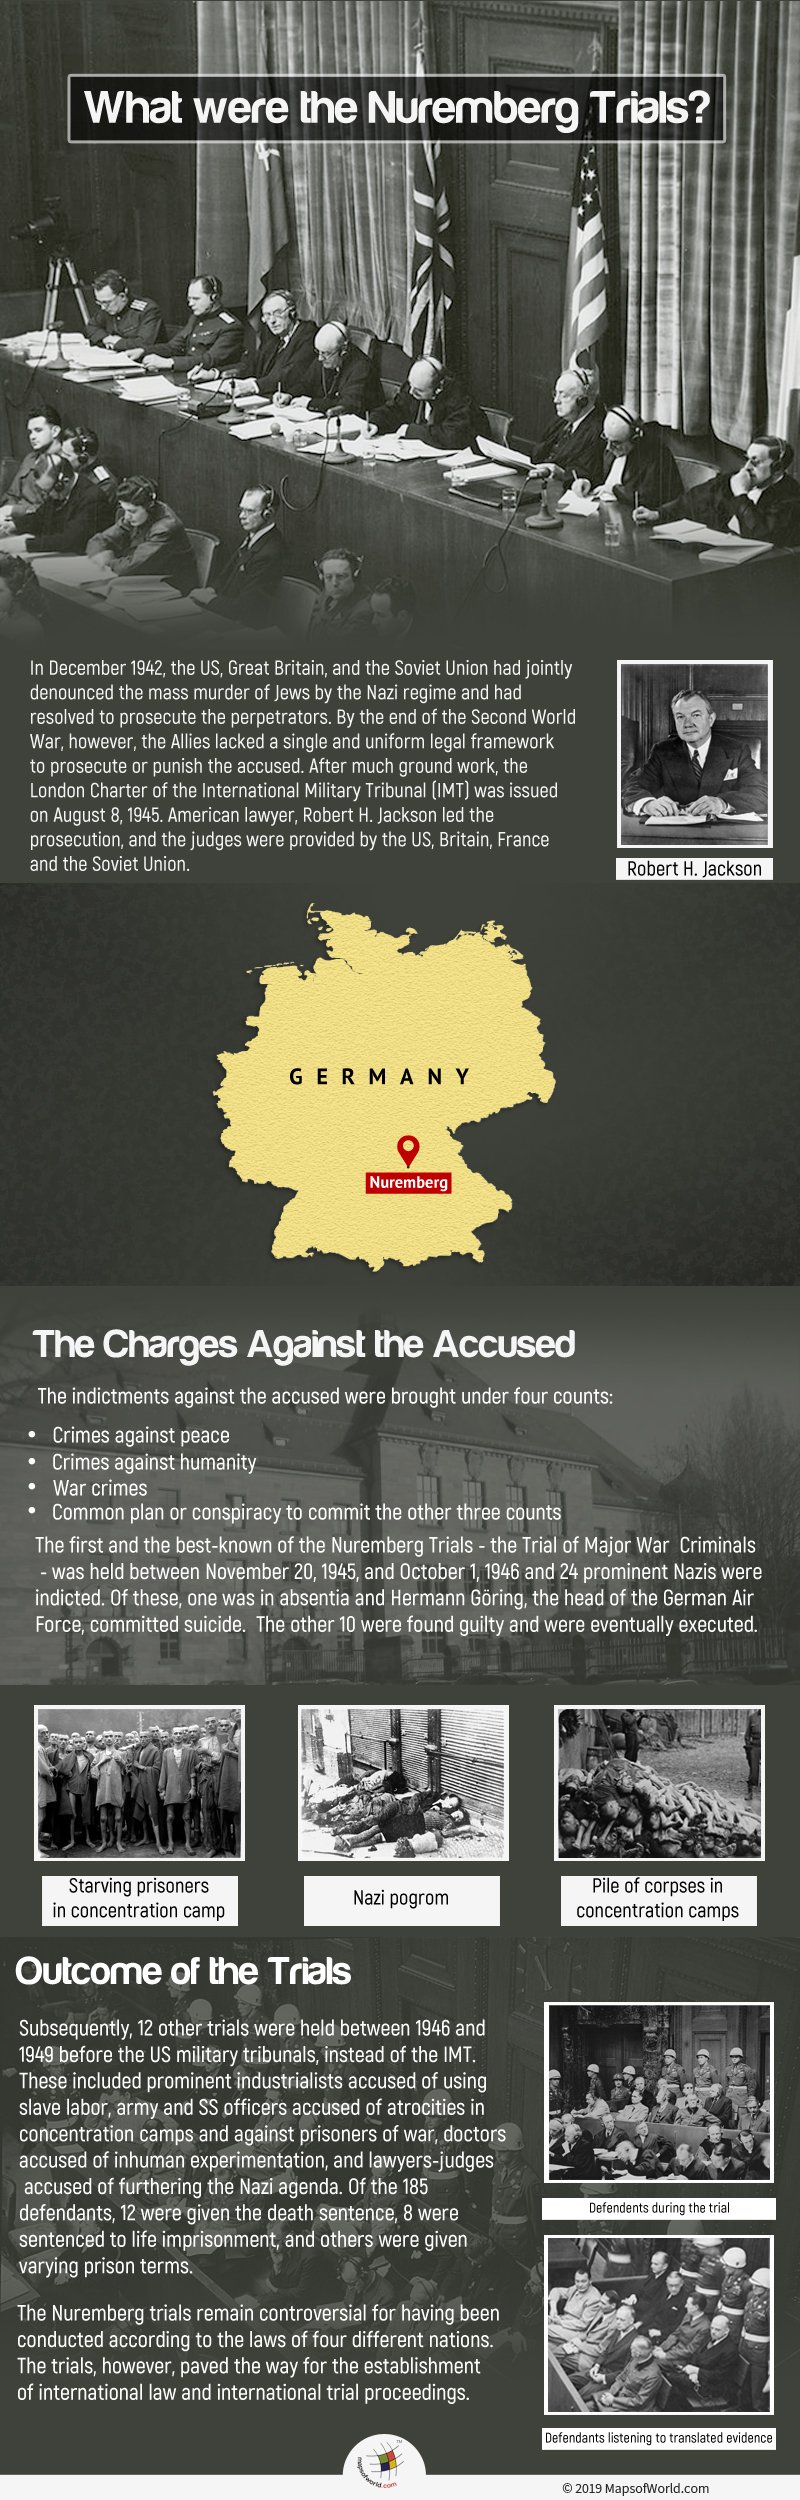 Infographic Giving Details of The Nuremberg Trials